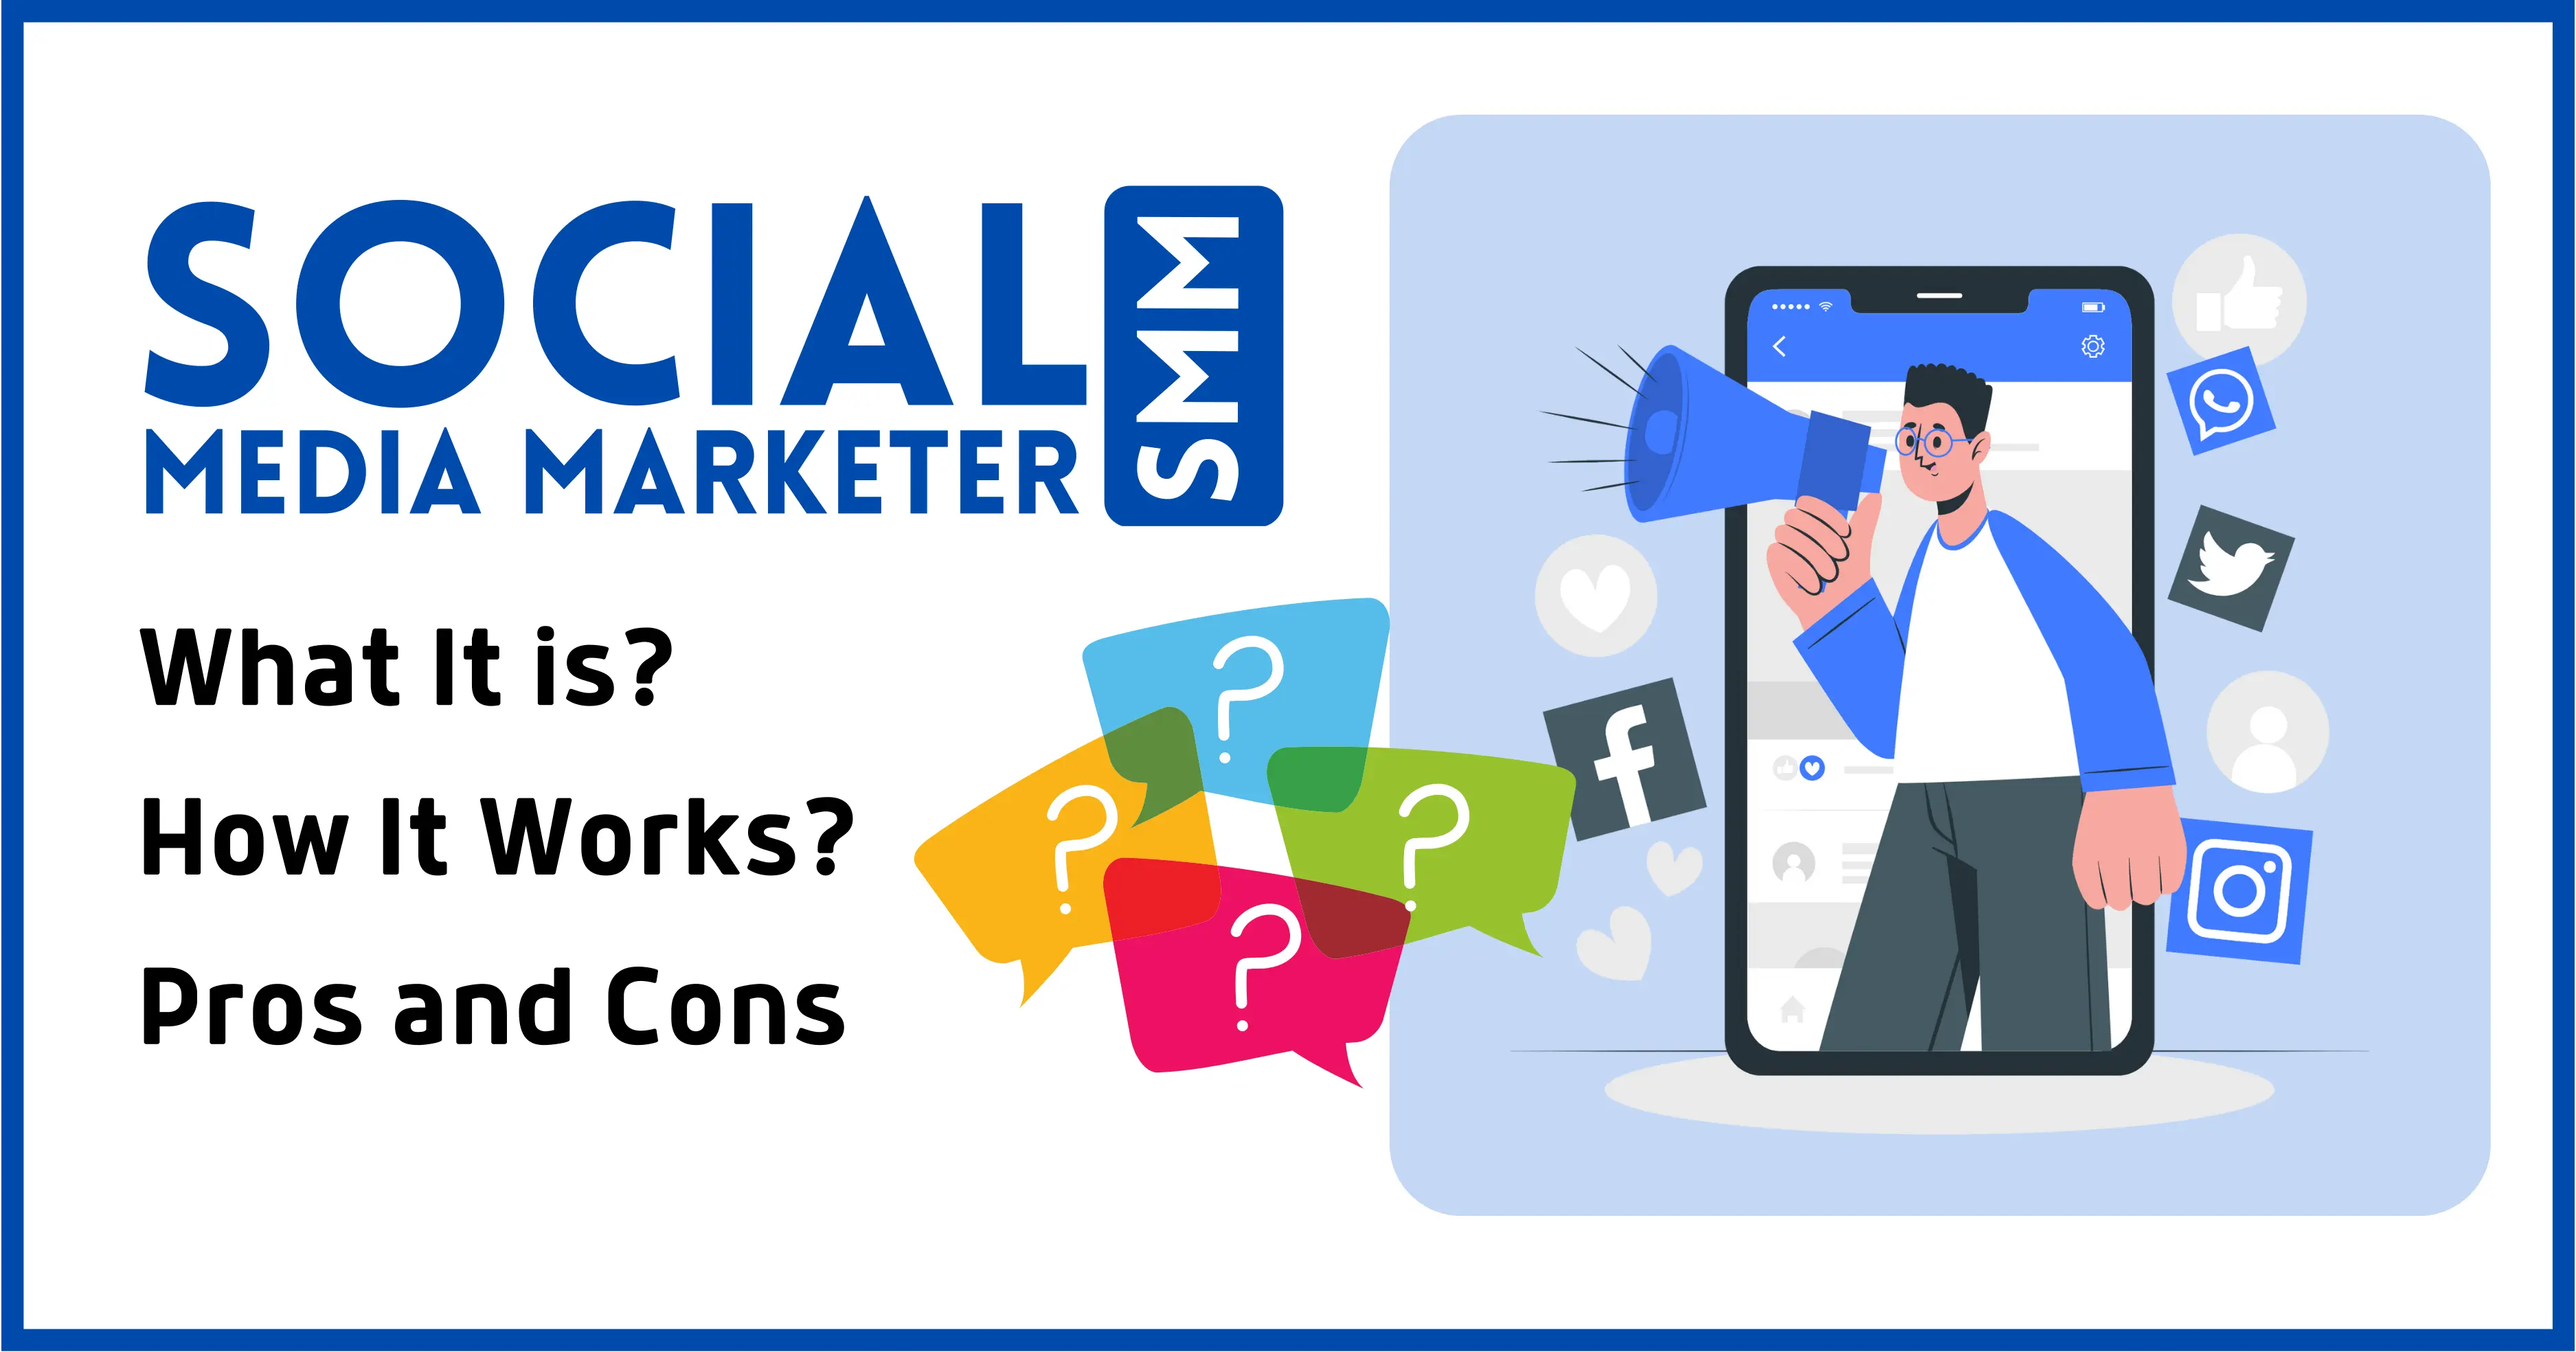 Social Media Marketing (SMM): What It Is, How It Works, Pros and Cons